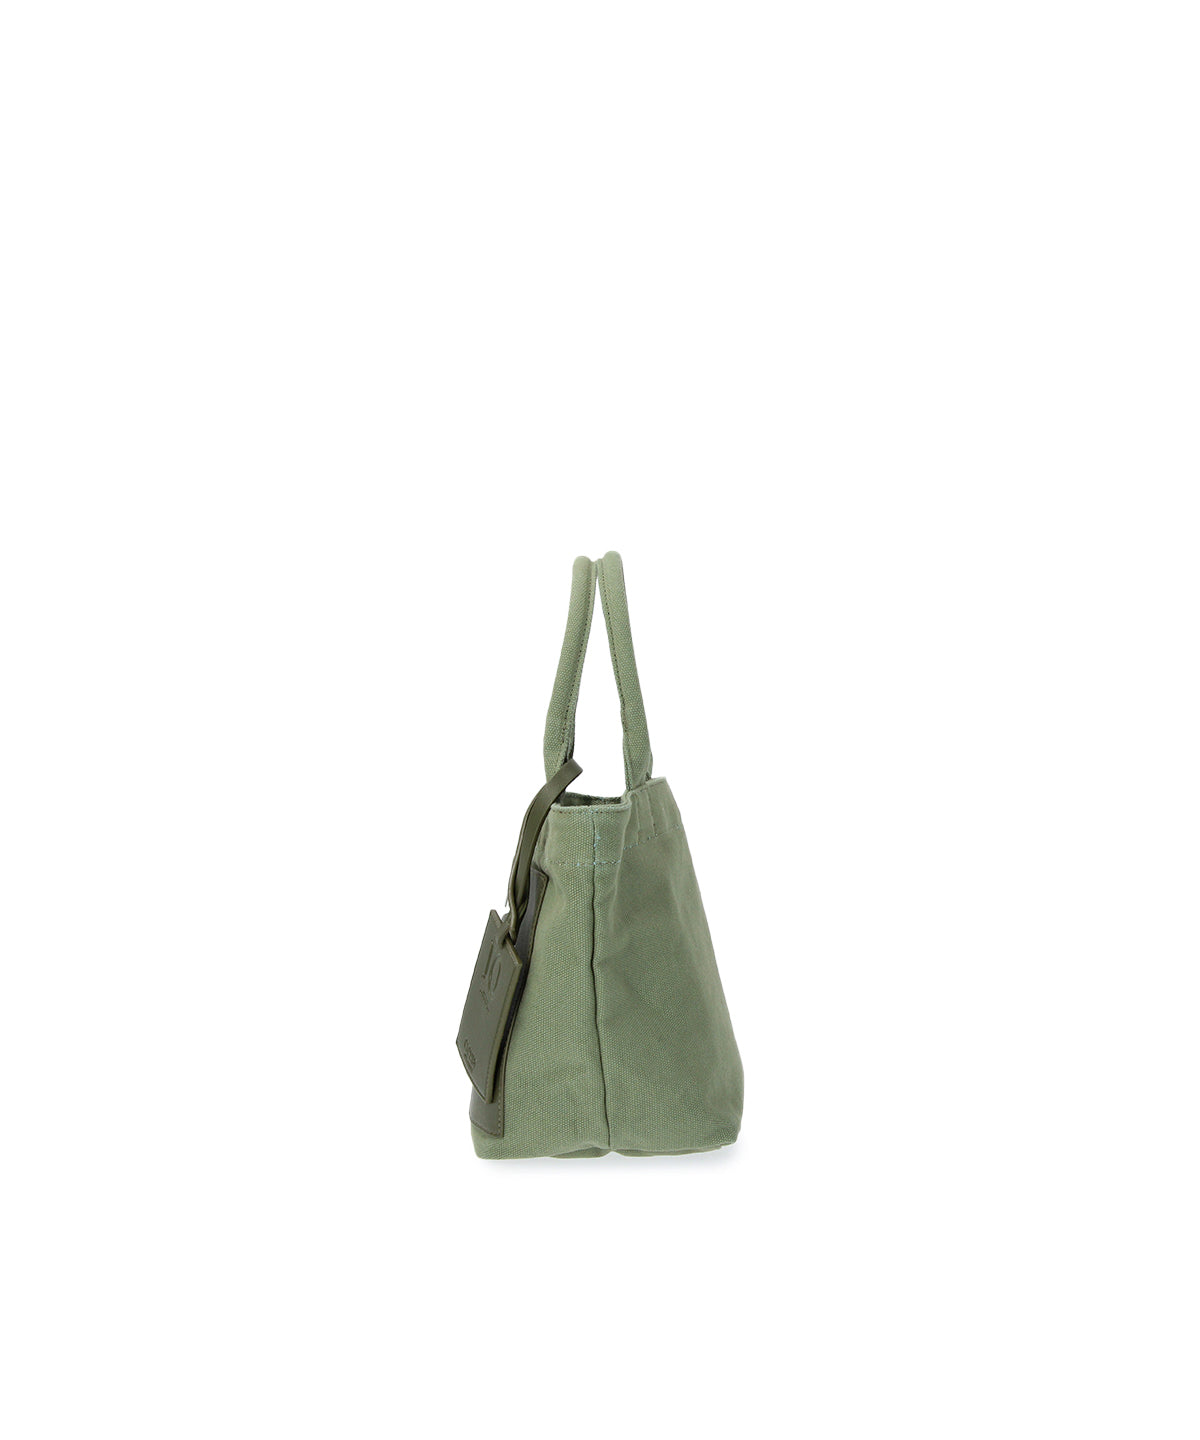 Colored Canvas Tote (Small) KAHKI | バッグ | CLOUDY公式通販サイト